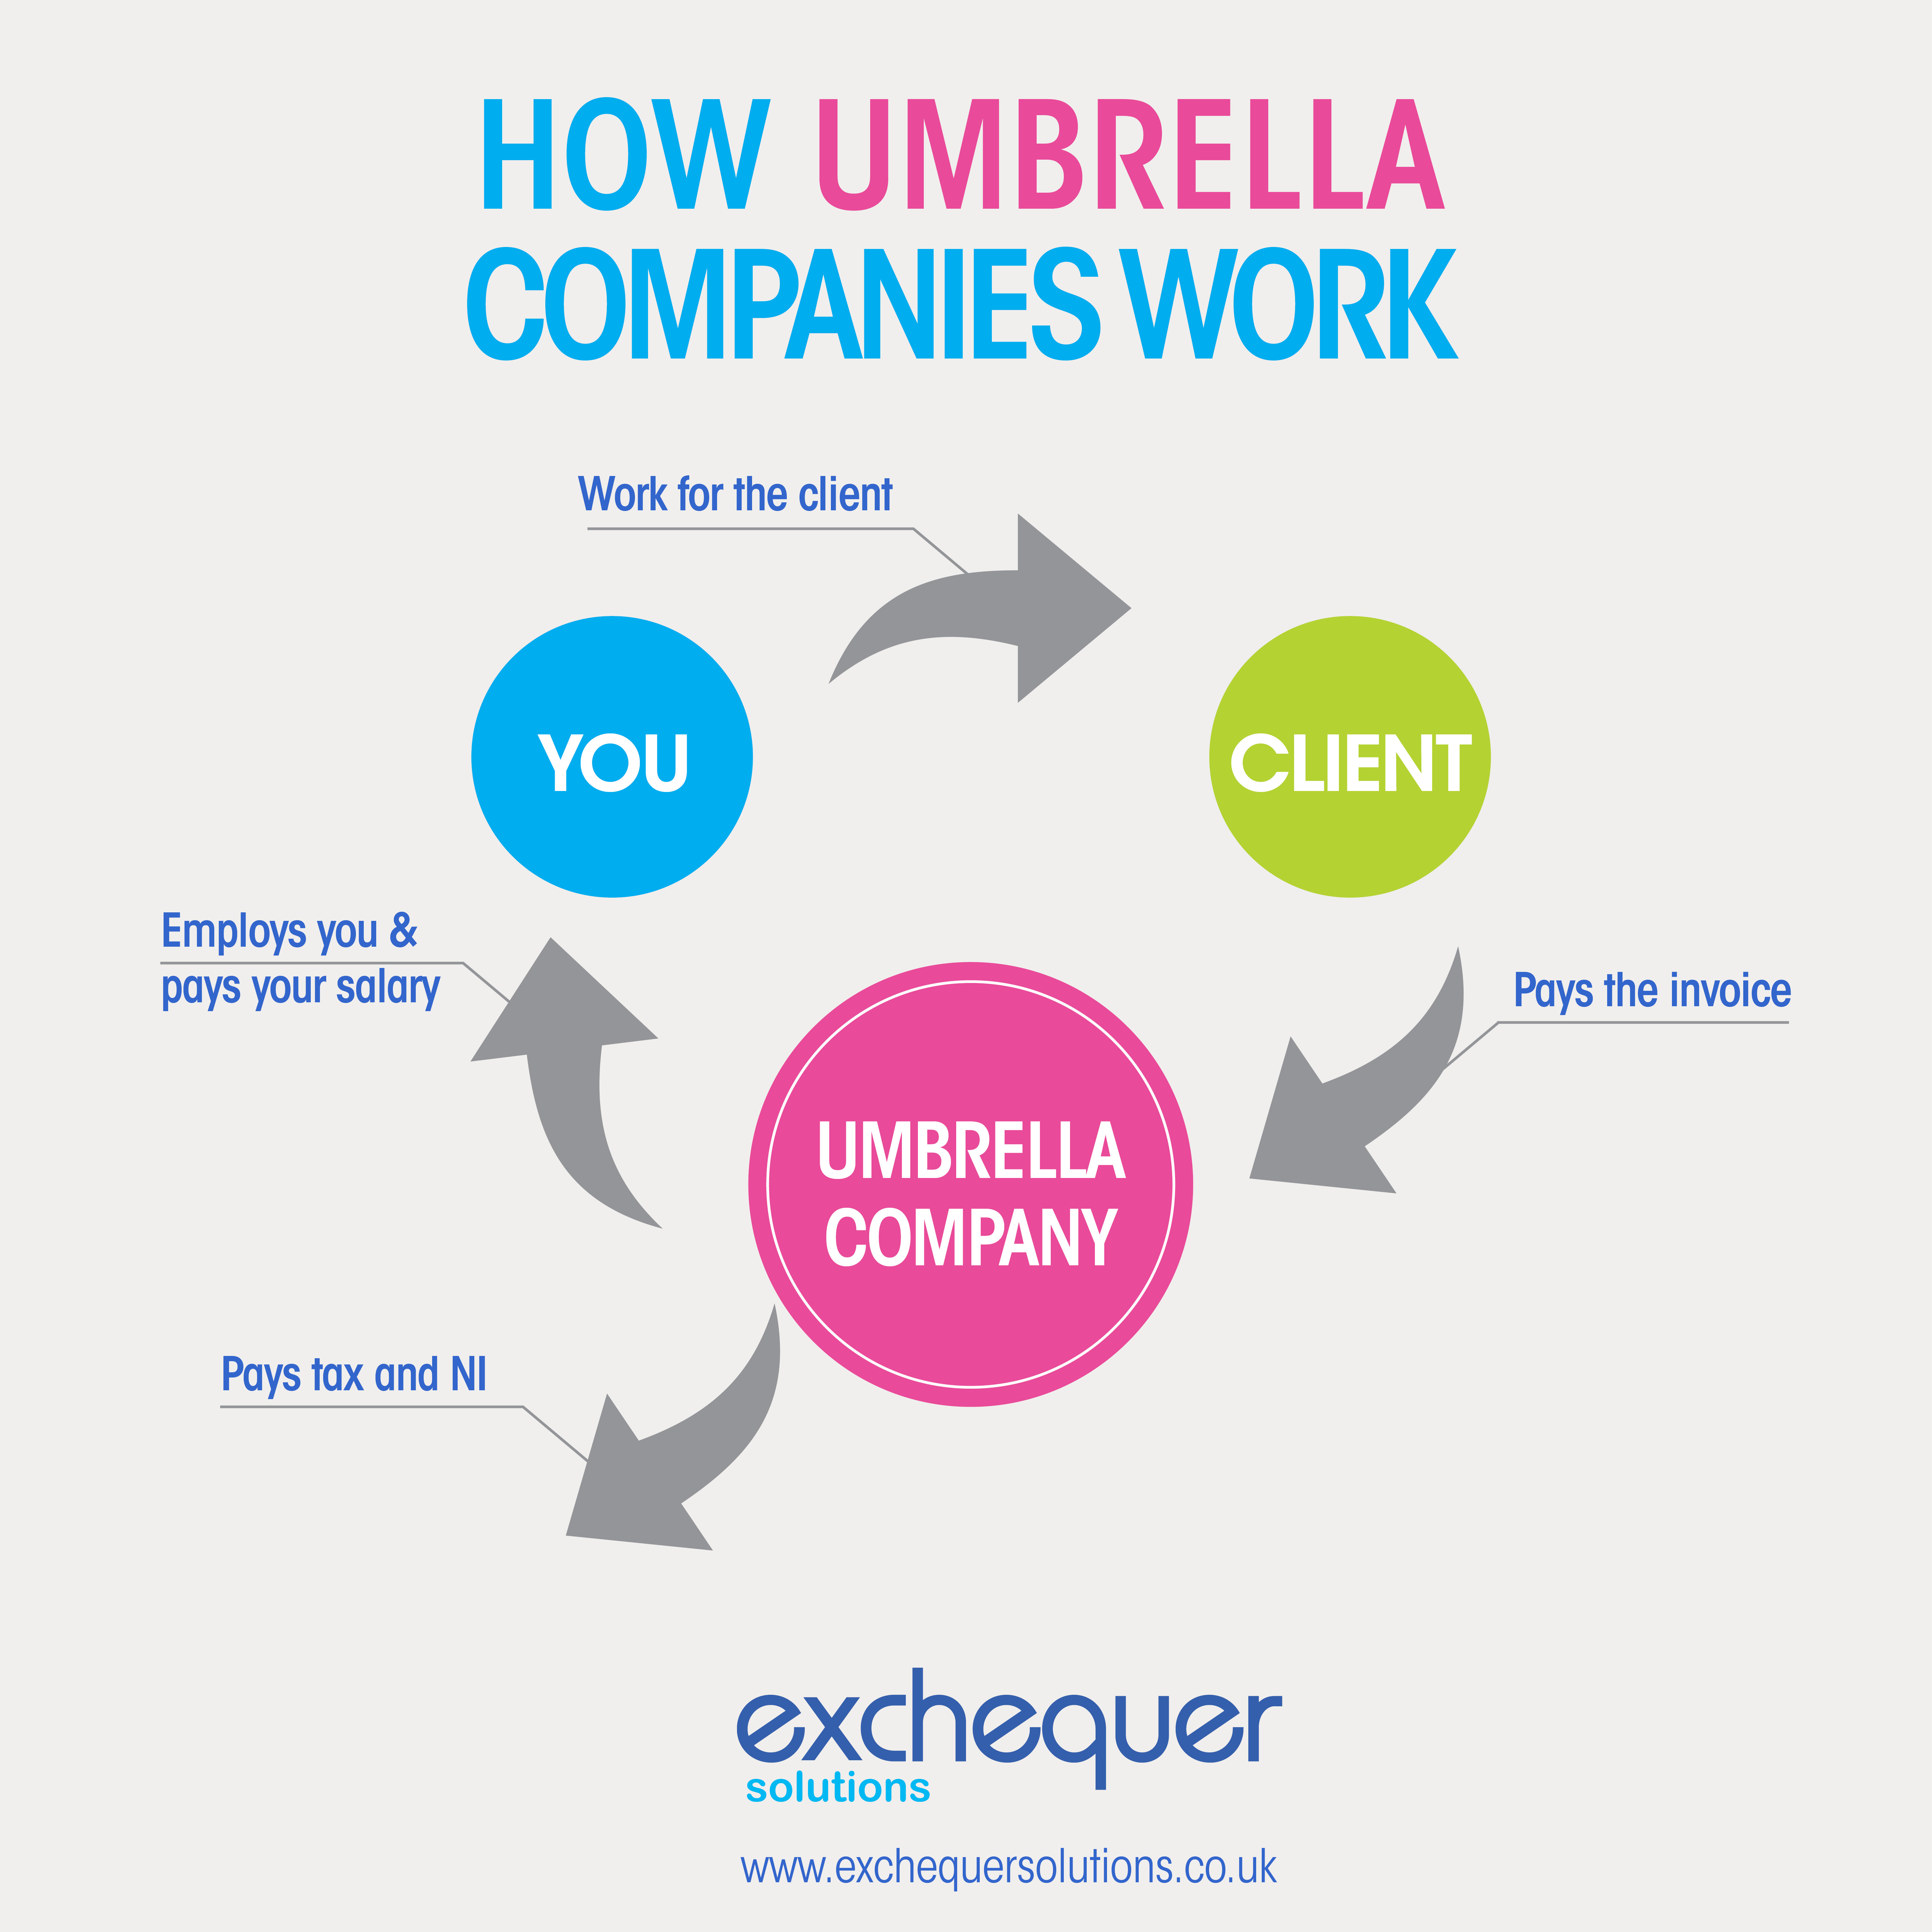 What Is An Umbrella Company? | Exchequer Solutions